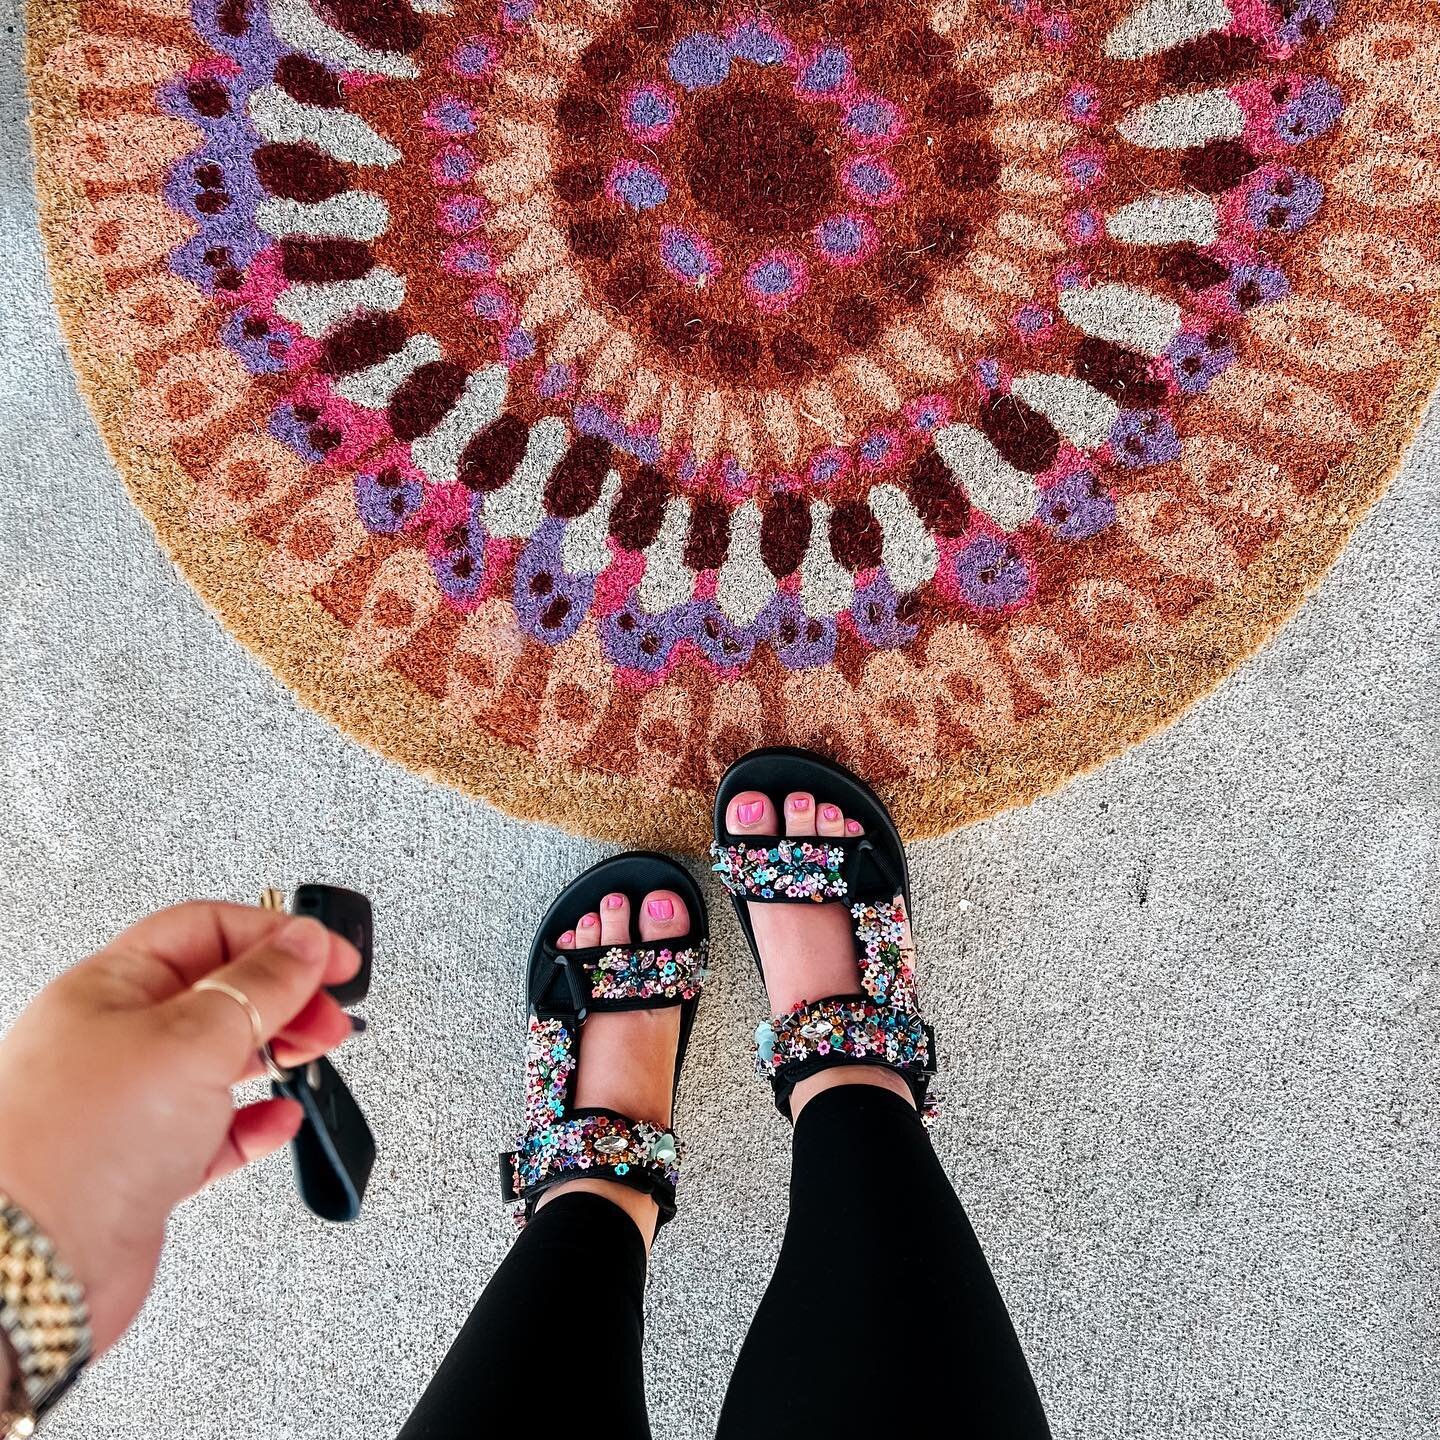 WE MOVED TO&hellip; GERMANTOWN! 🌼 Literally no one guessed it 🤣 I didn&rsquo;t say it was outside of Nashville&hellip; just said we were moving 🤷🏼&zwj;♀️ Can&rsquo;t wait to share an empty apartment tour soon!

My door mat is perfect for summer a